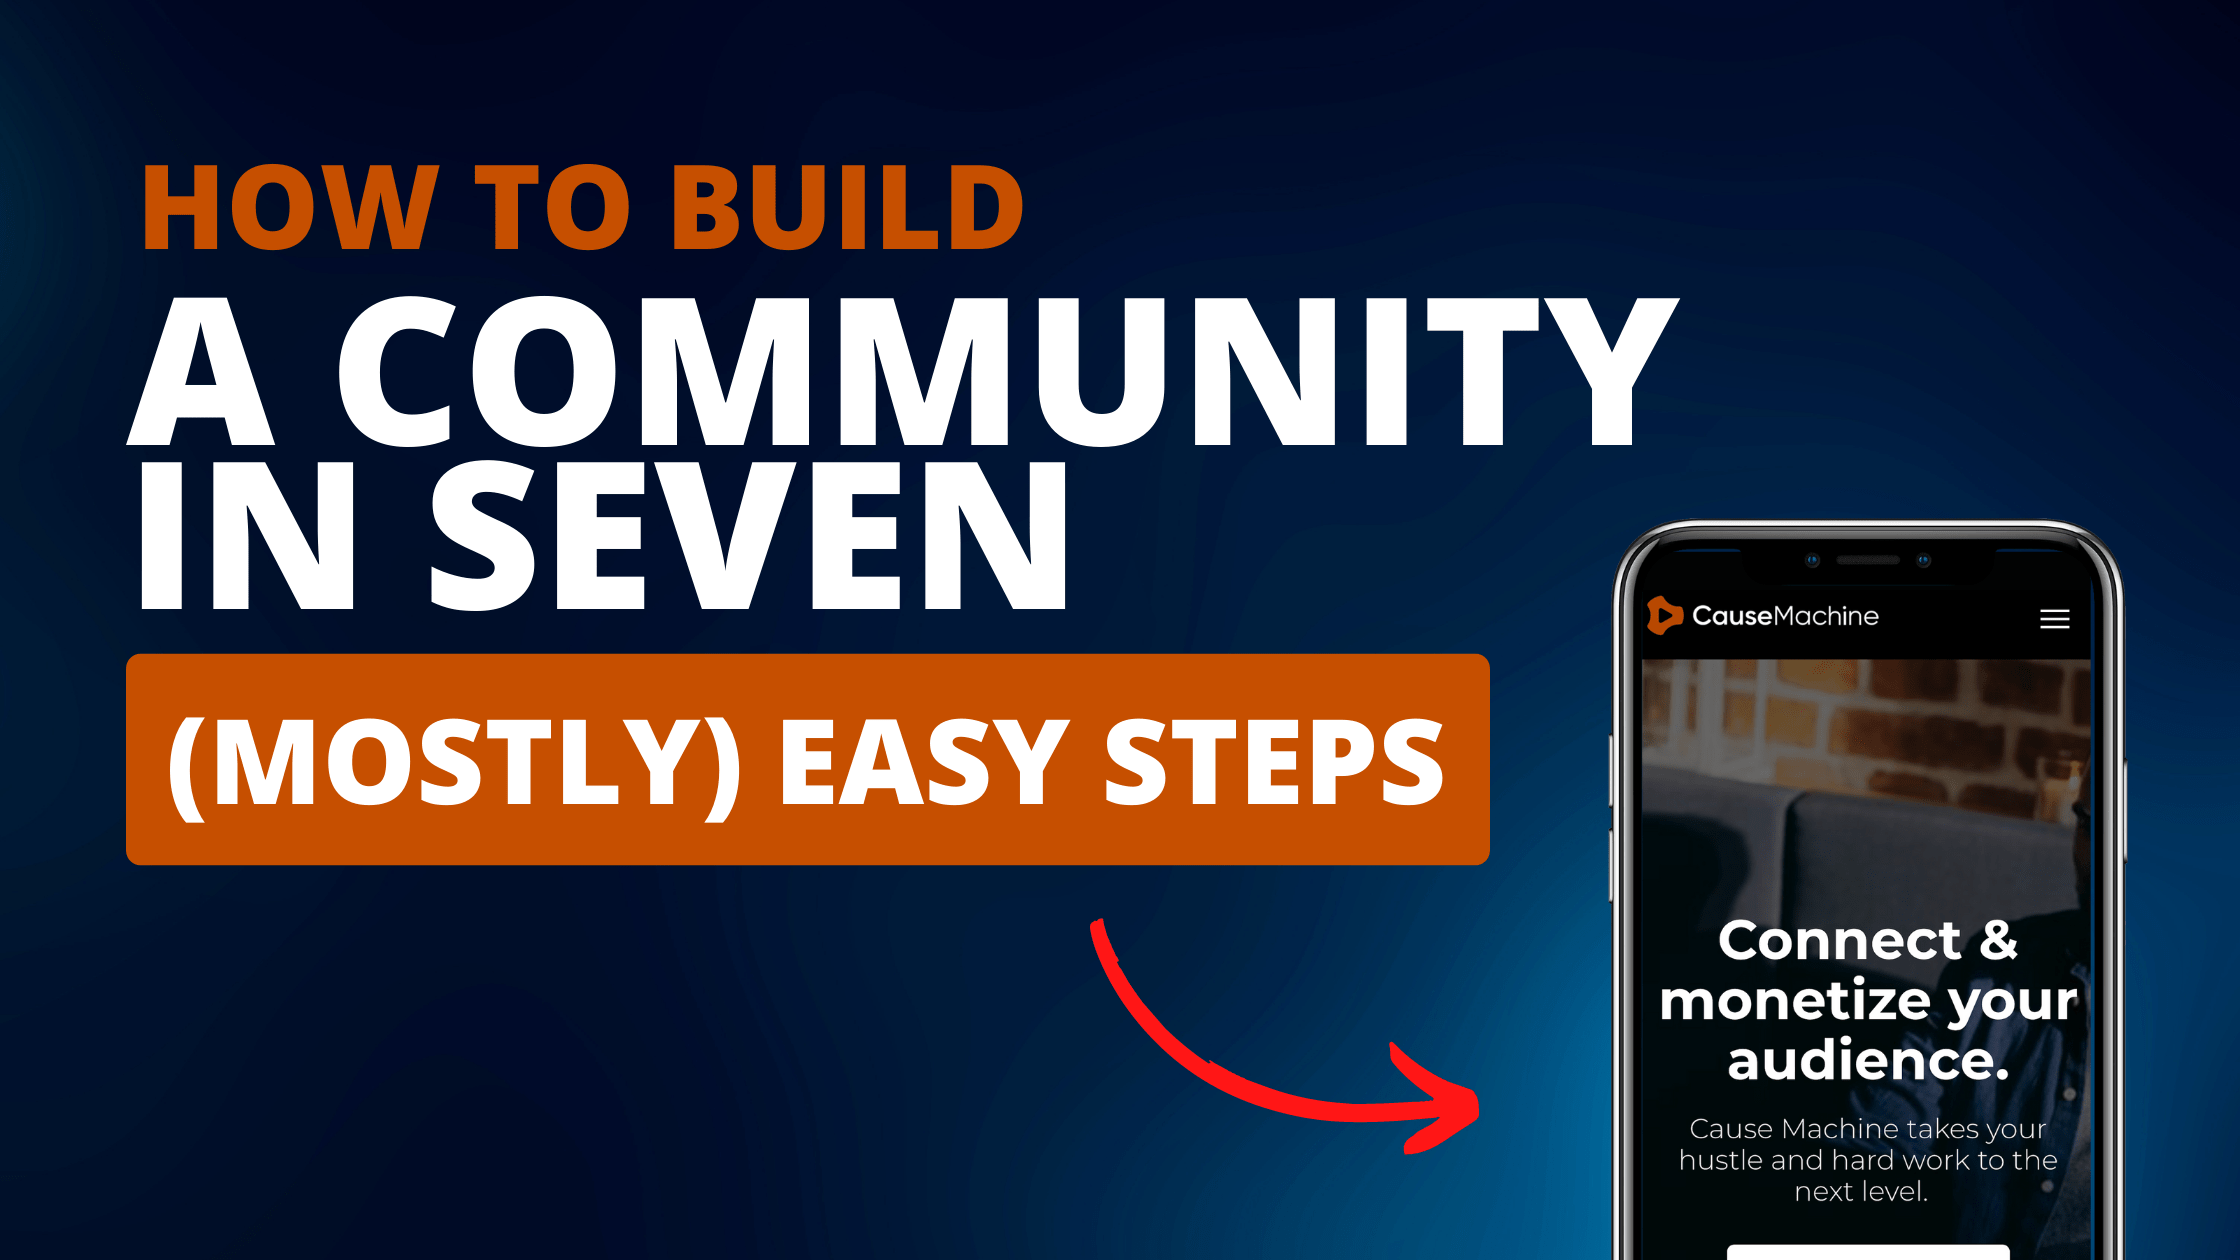 How to build a community